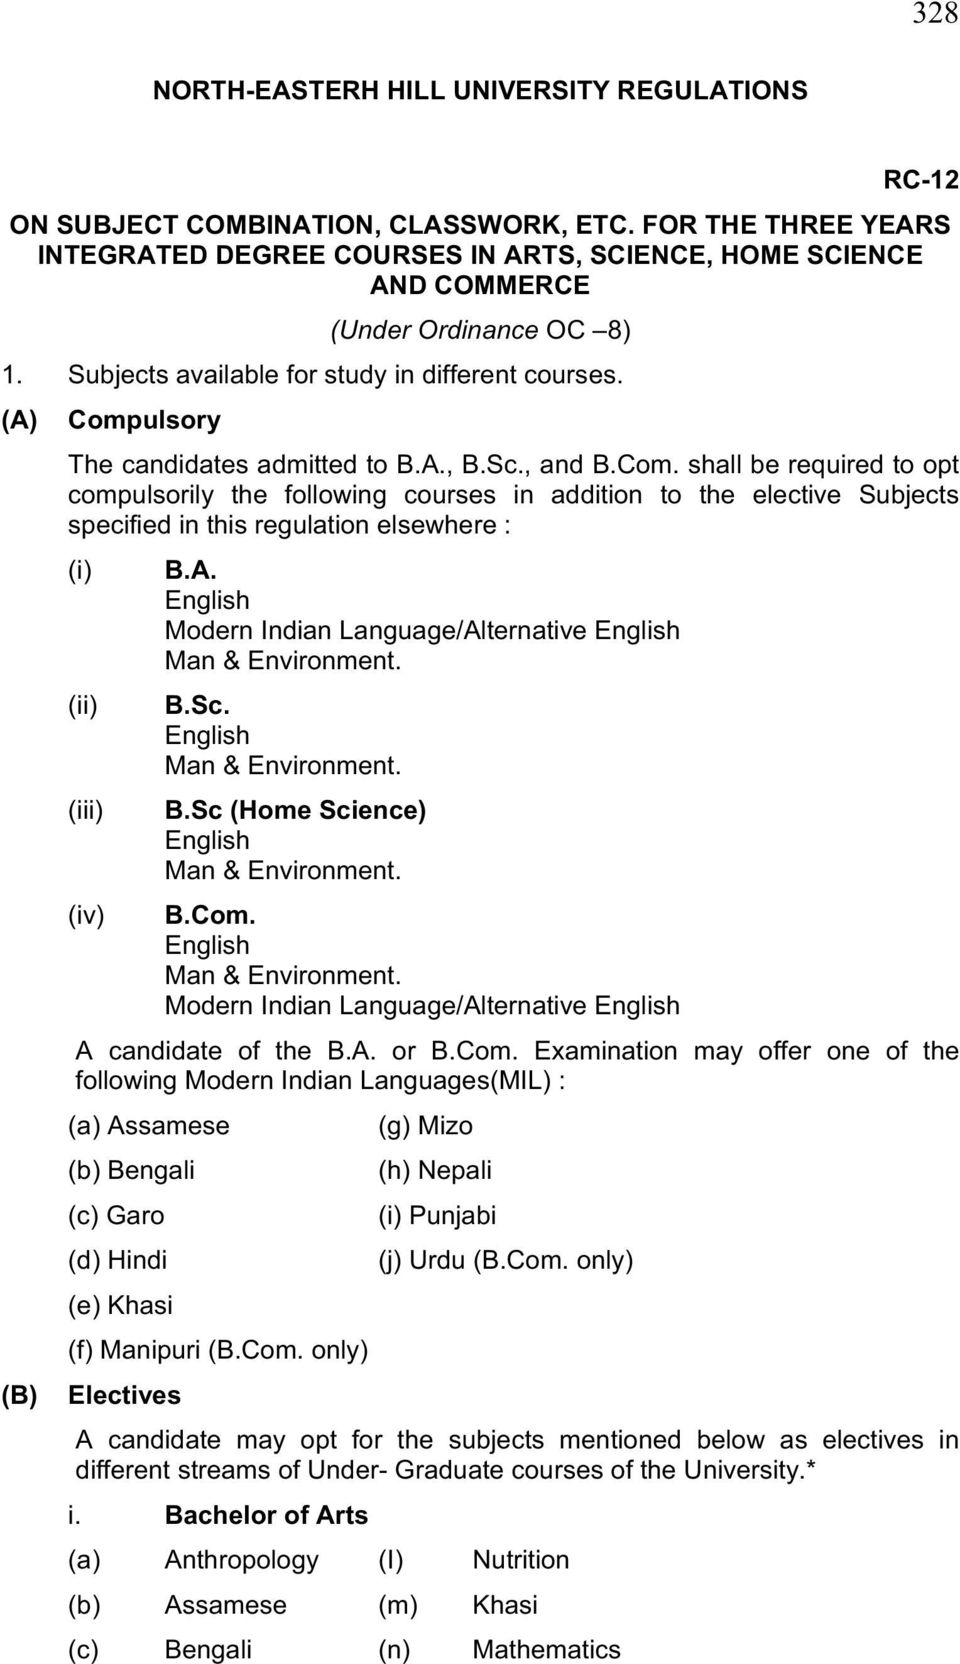 (A) Compulsory The candidates admitted to B.A.,B.Sc.,and B.Com. shalbe required to opt compulsorily the fo lowing courses in addition to the elective Subjects specified in this regulation elsewhere : (iv) B.